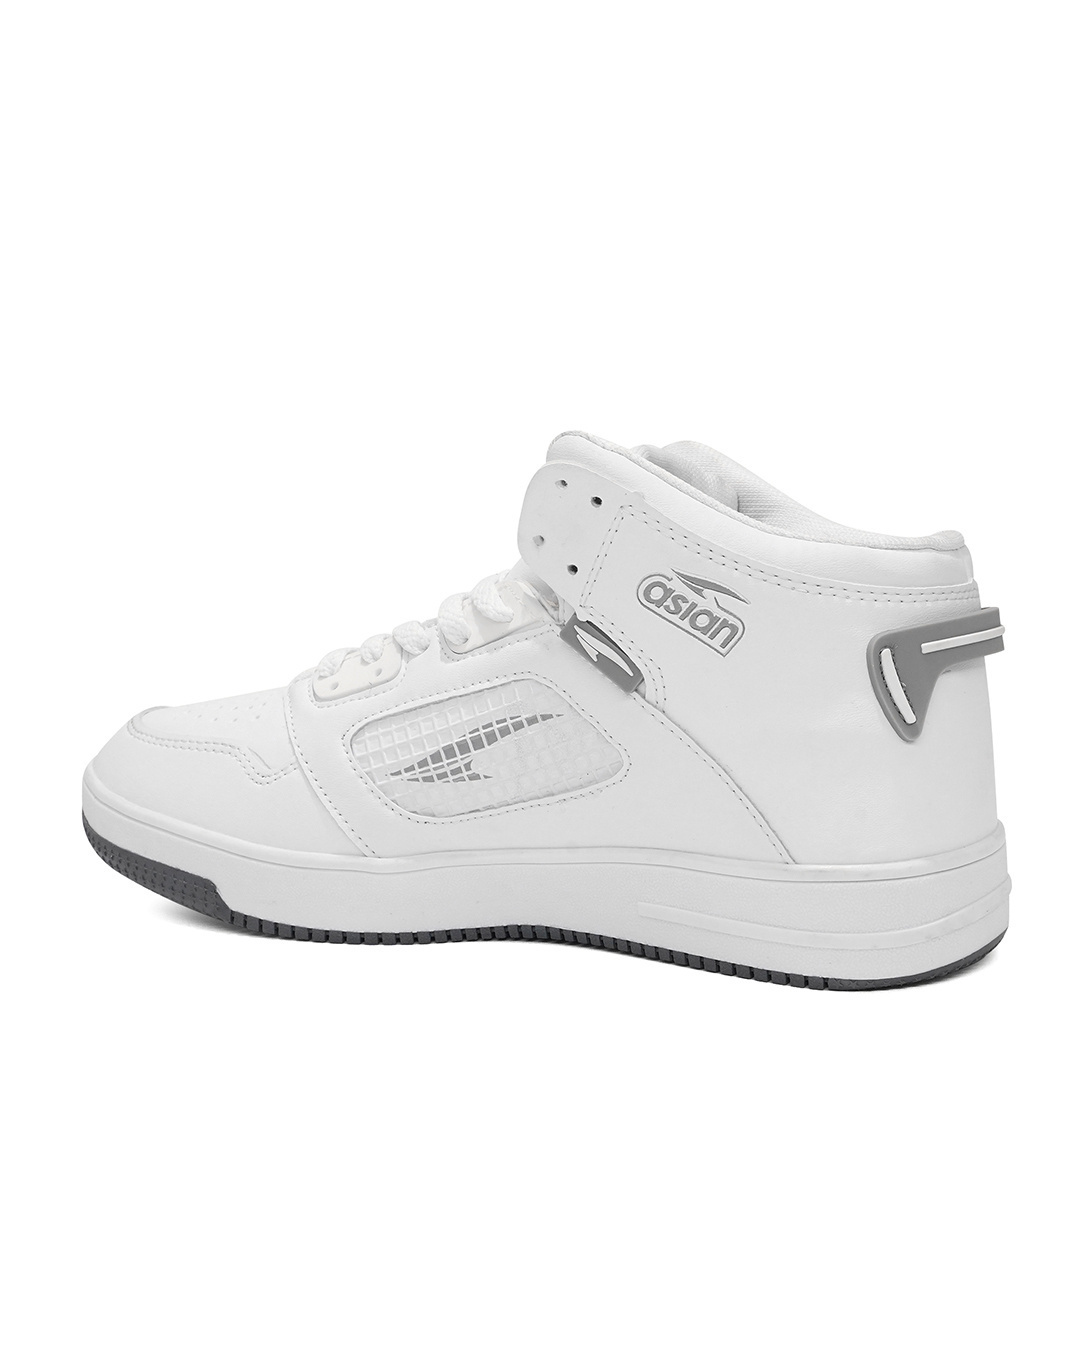 Shop Men's White High-Top Sneakers-Back